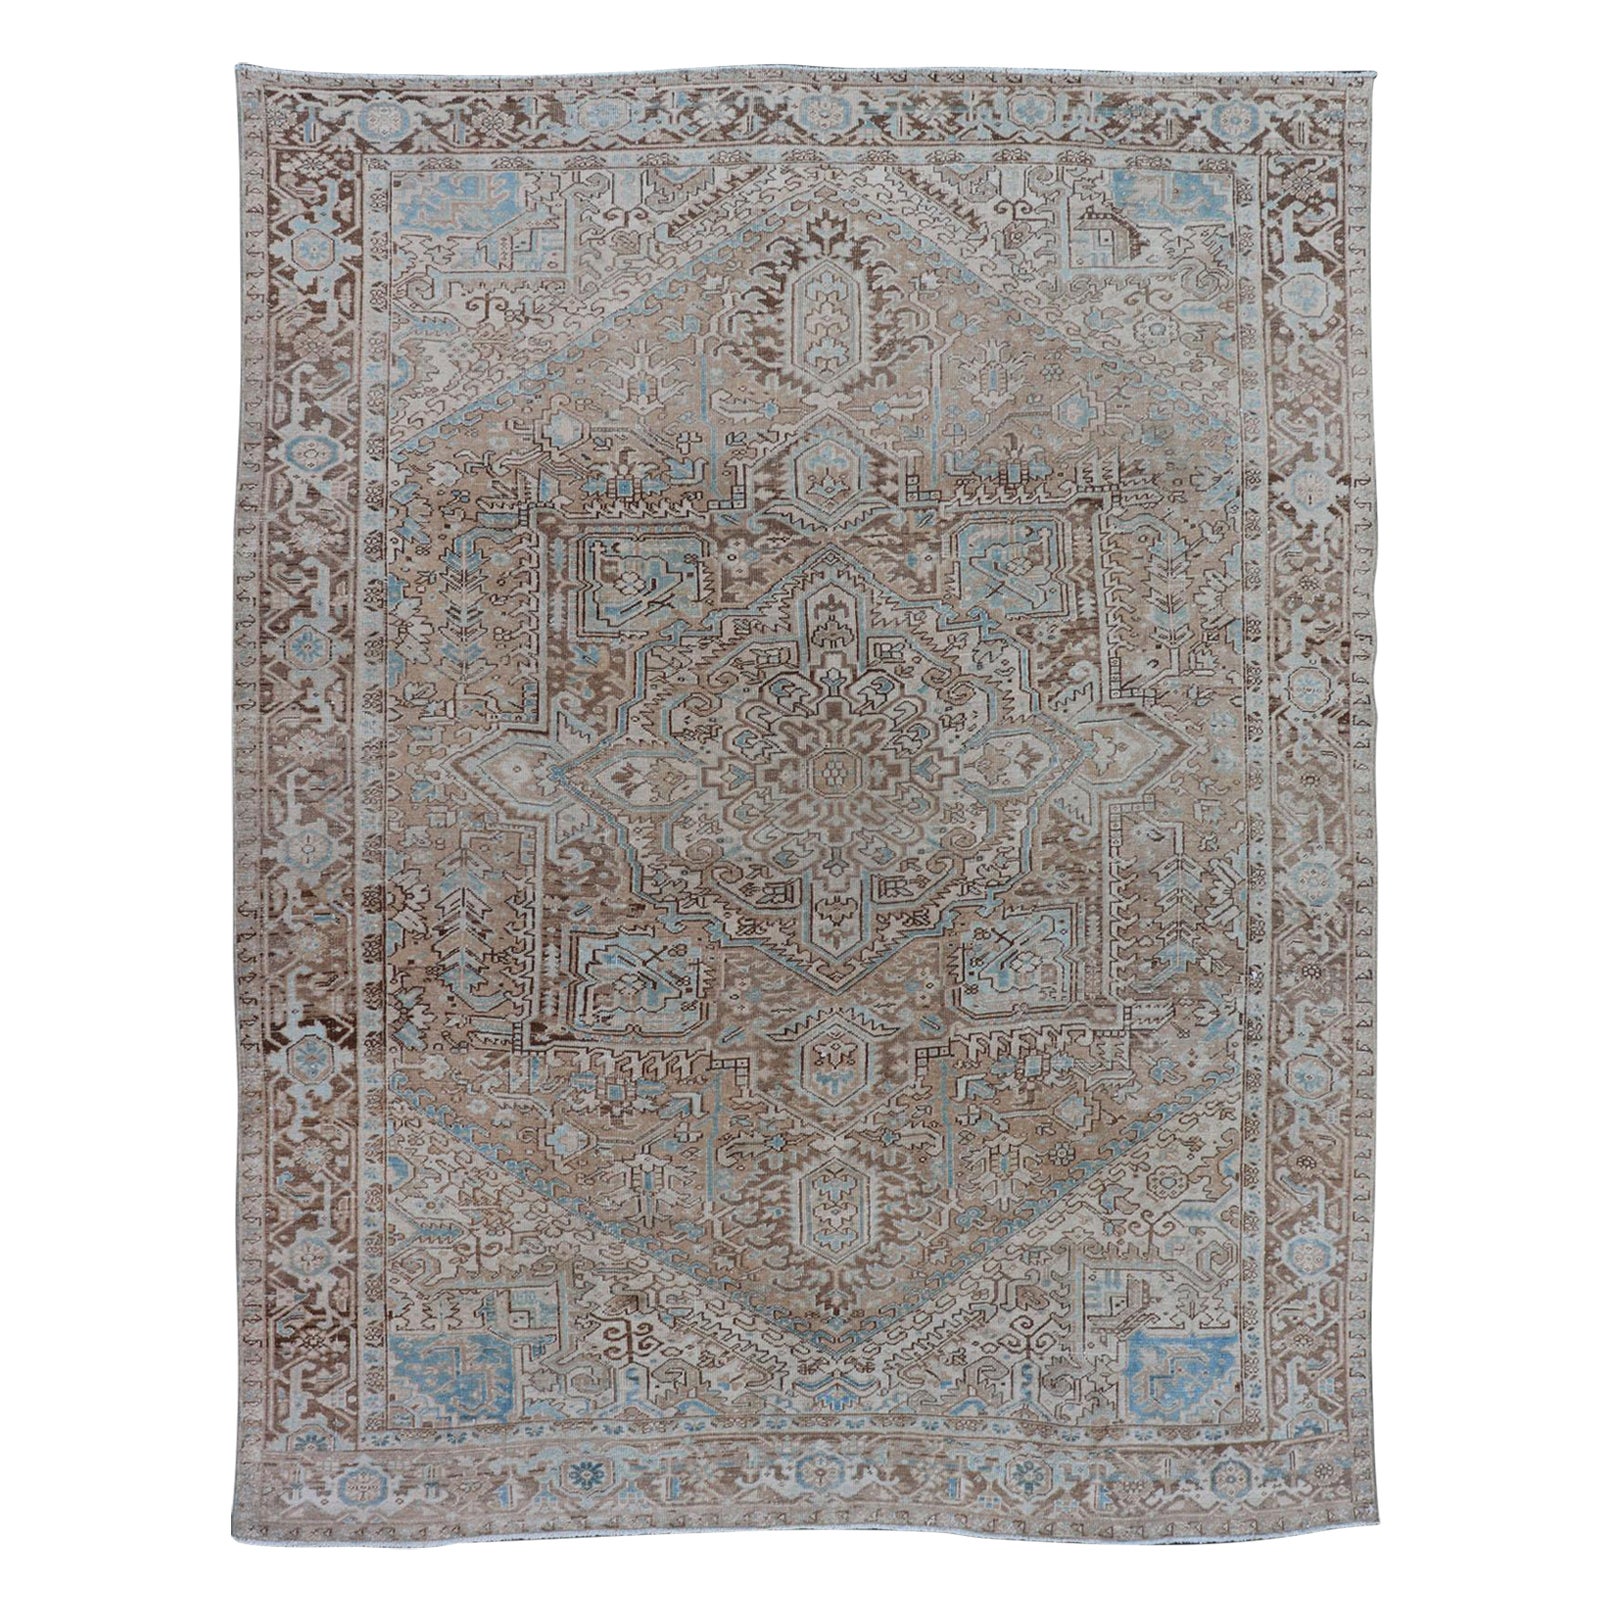 Antique Persian Heriz Rug with Geometric Design in Taupe, Tan, Brown and Lt Blue For Sale